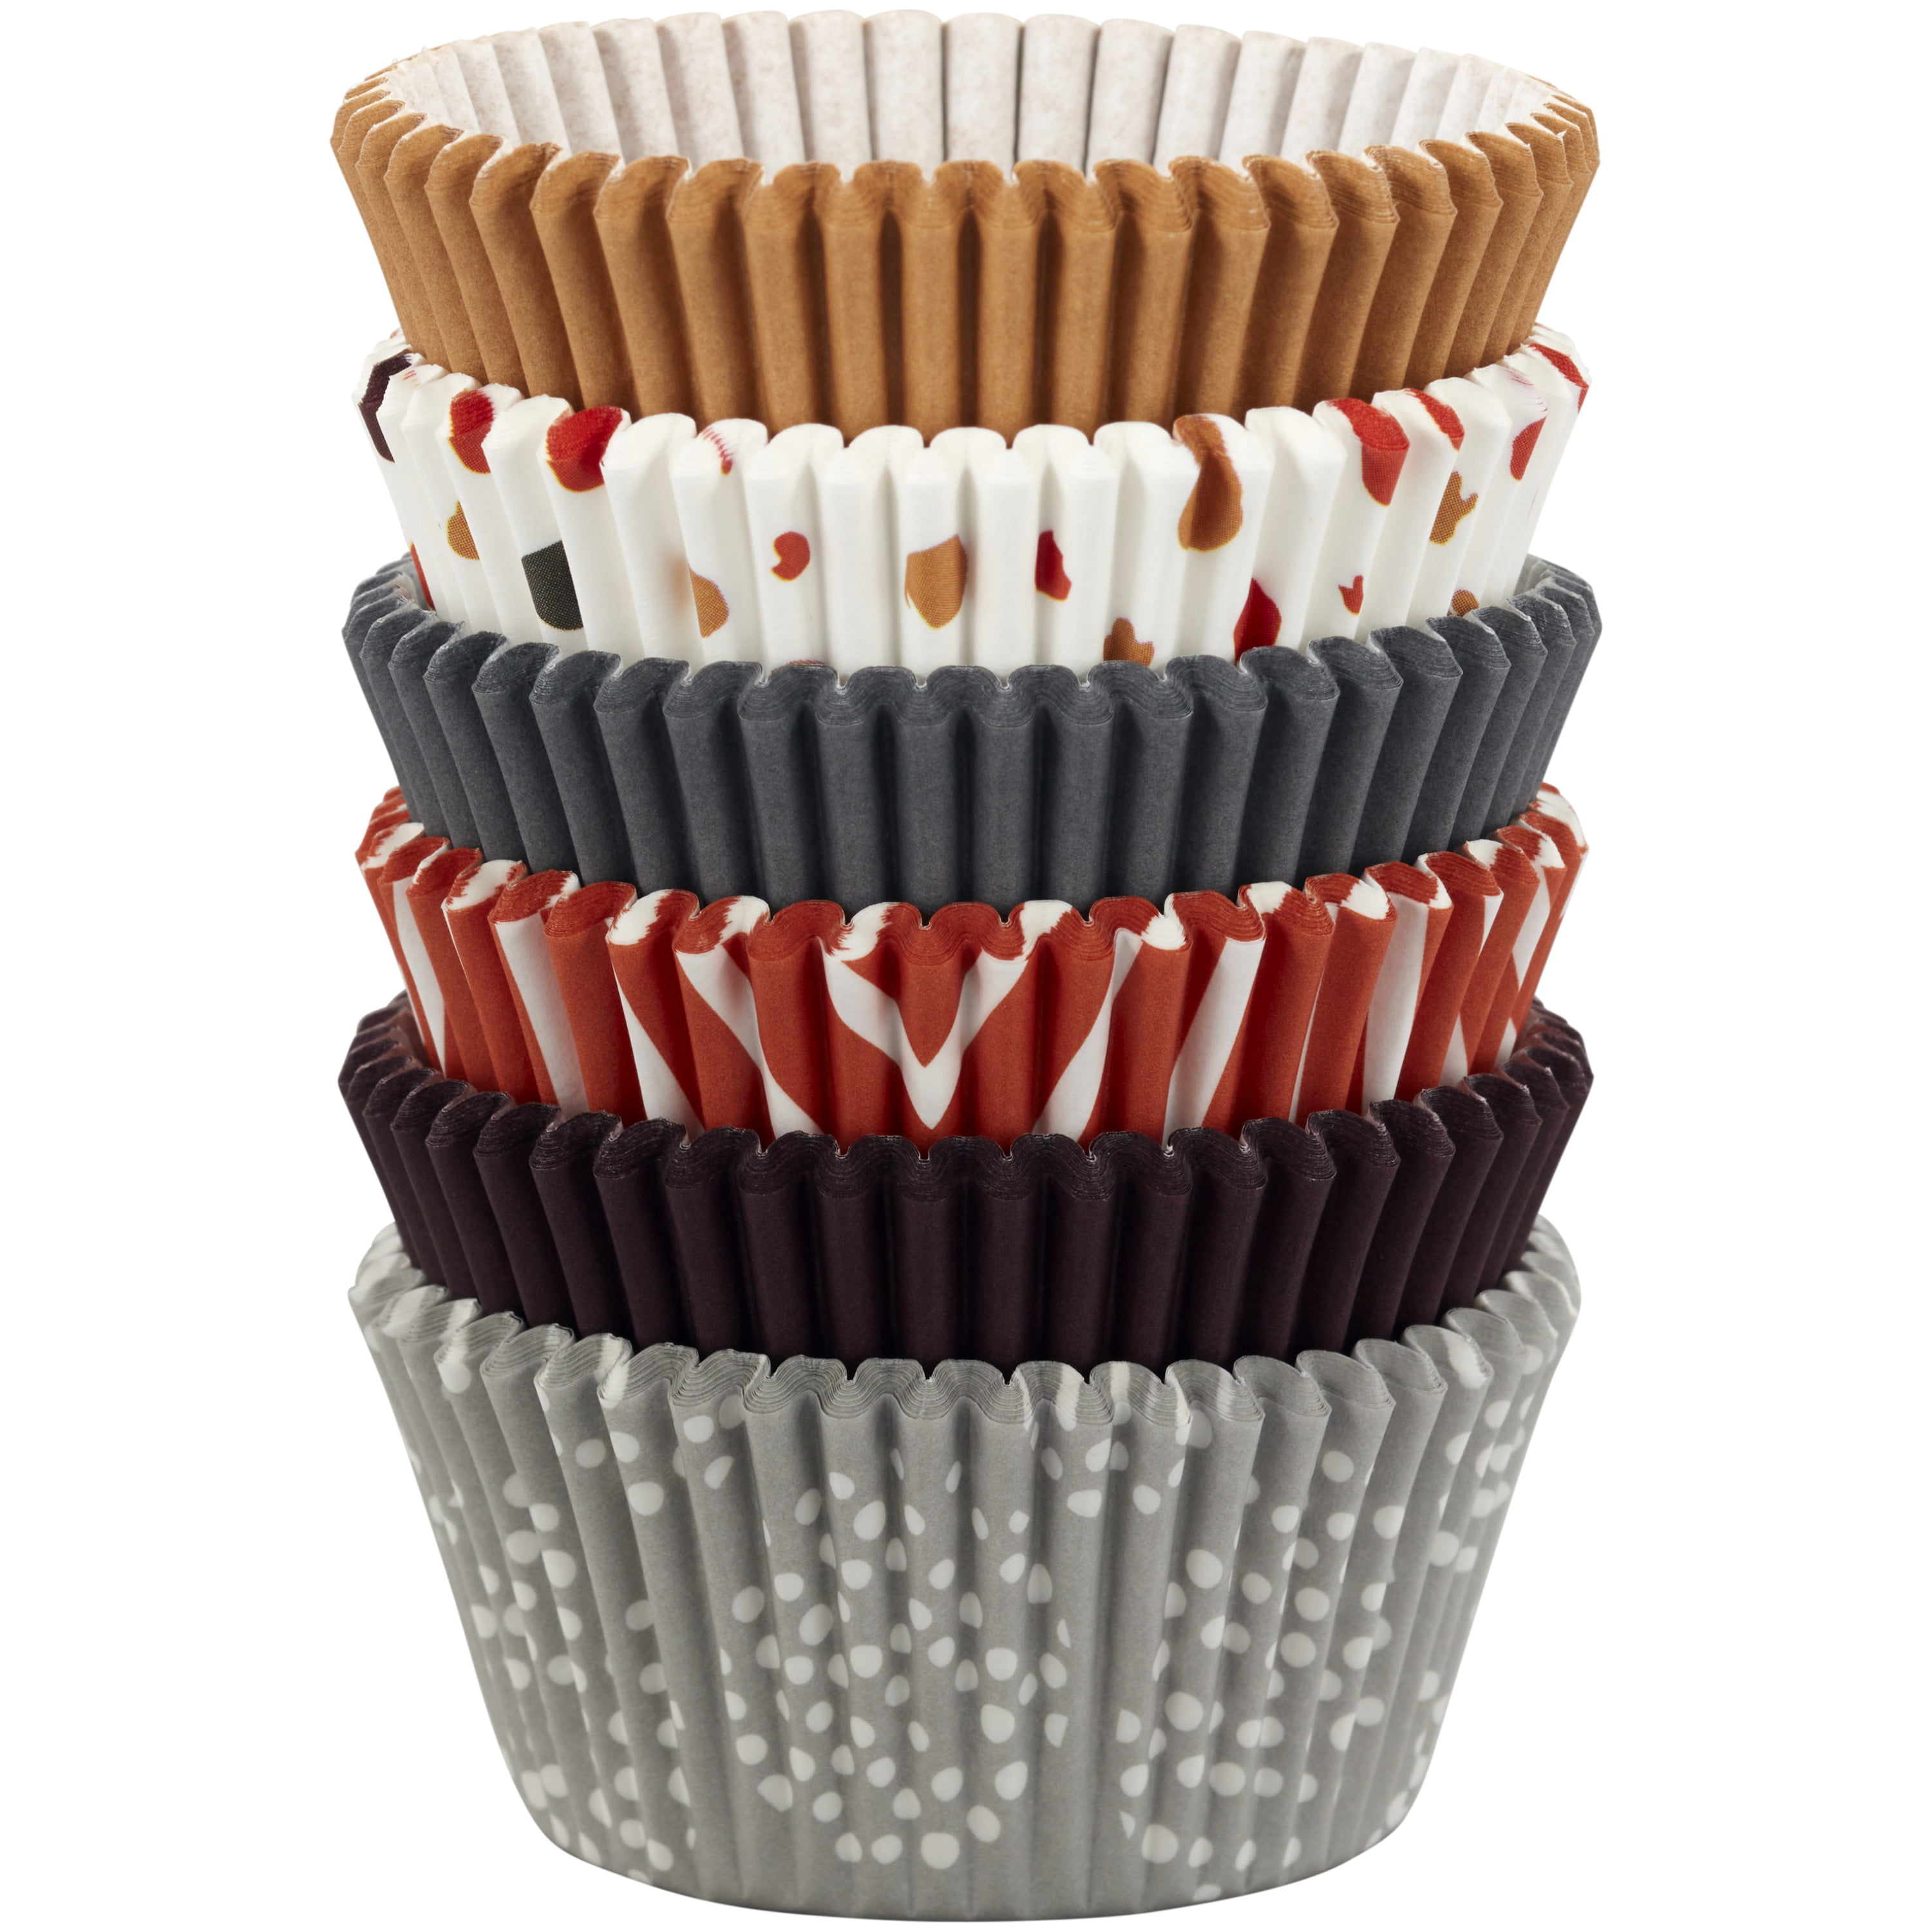 1496 2 Packs of 100 Mini Wilton Baking Cups Green and Red with White Dots 